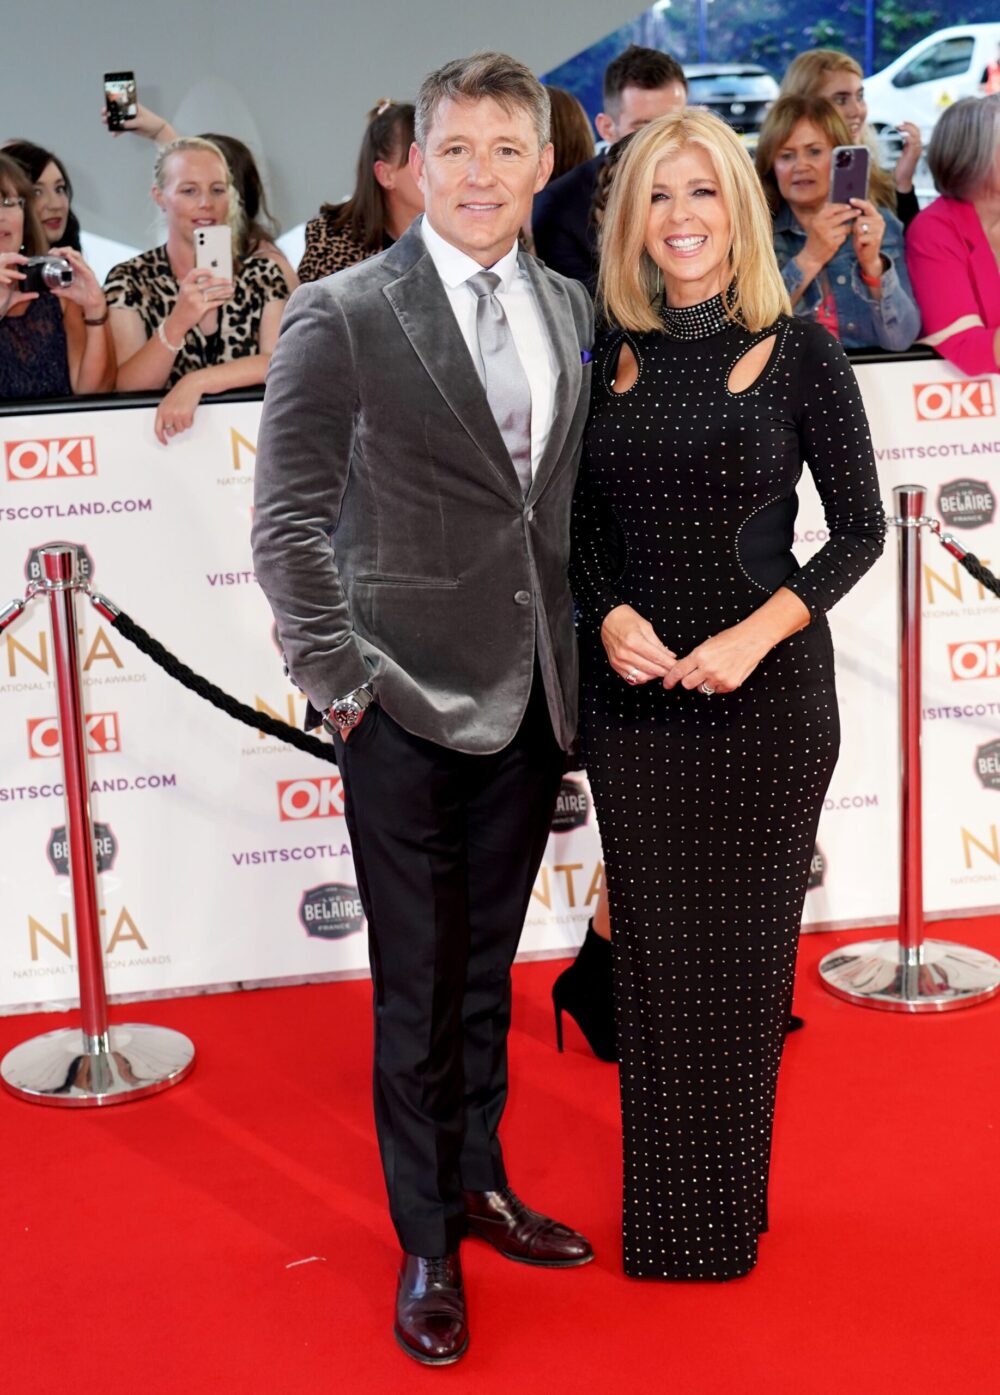 Ben Shephard and Kate Garraway have been a presenting duo on Good Morning Britain. Credit: PA